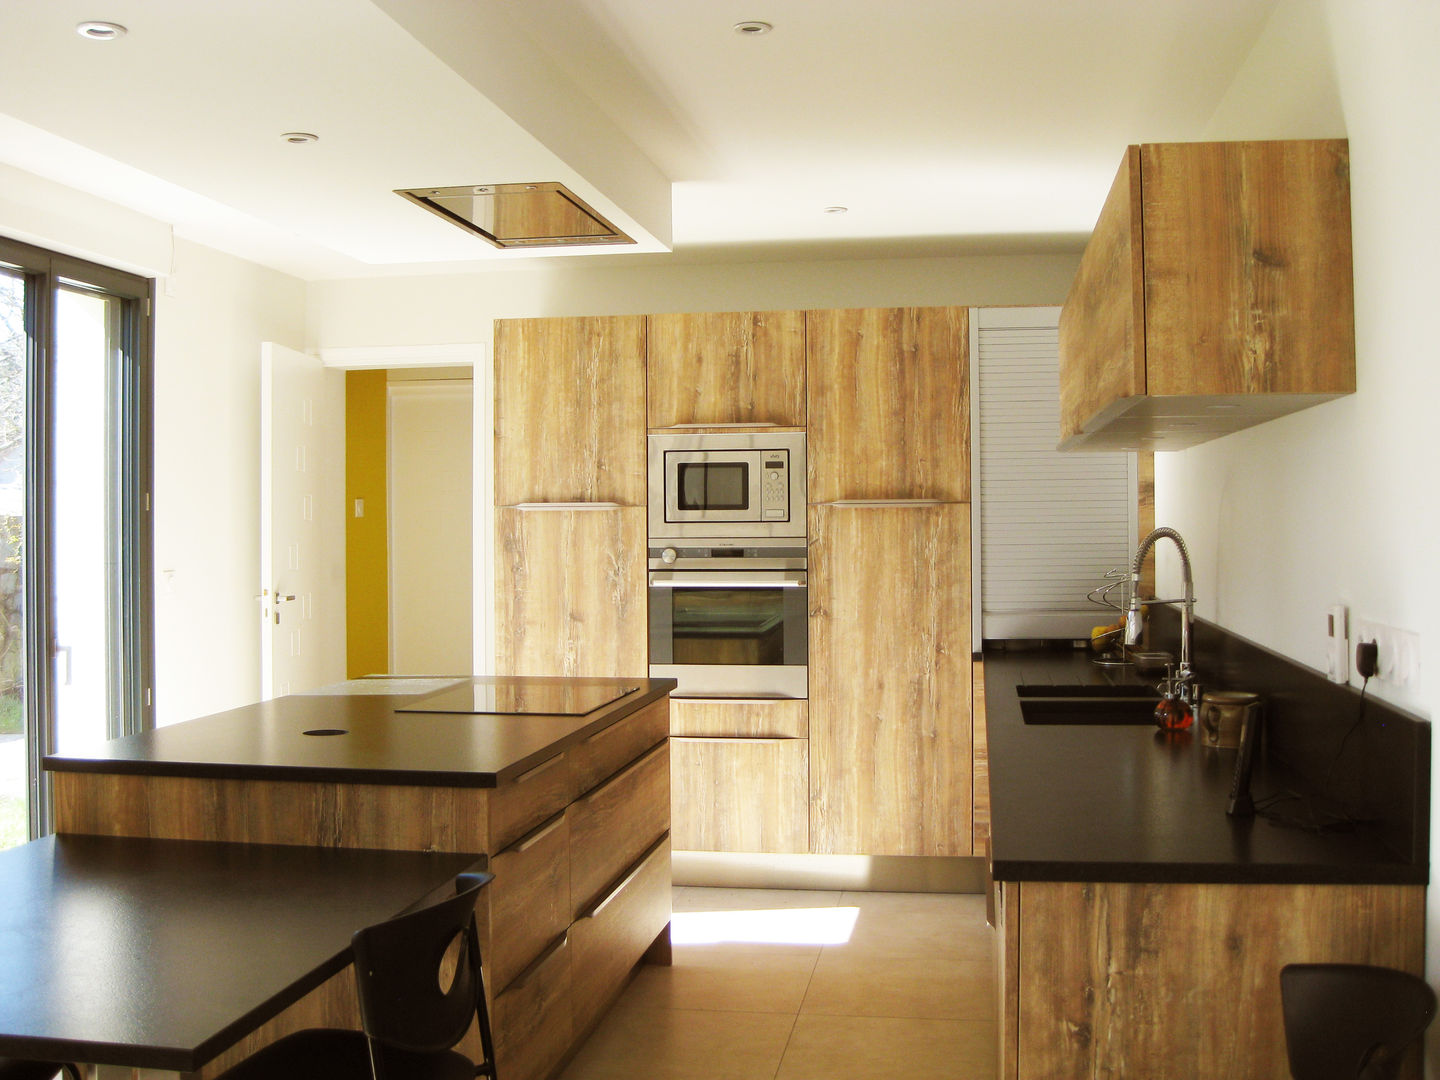 Rénovation / restructuration d'une maison, One look inside One look inside Built-in kitchens